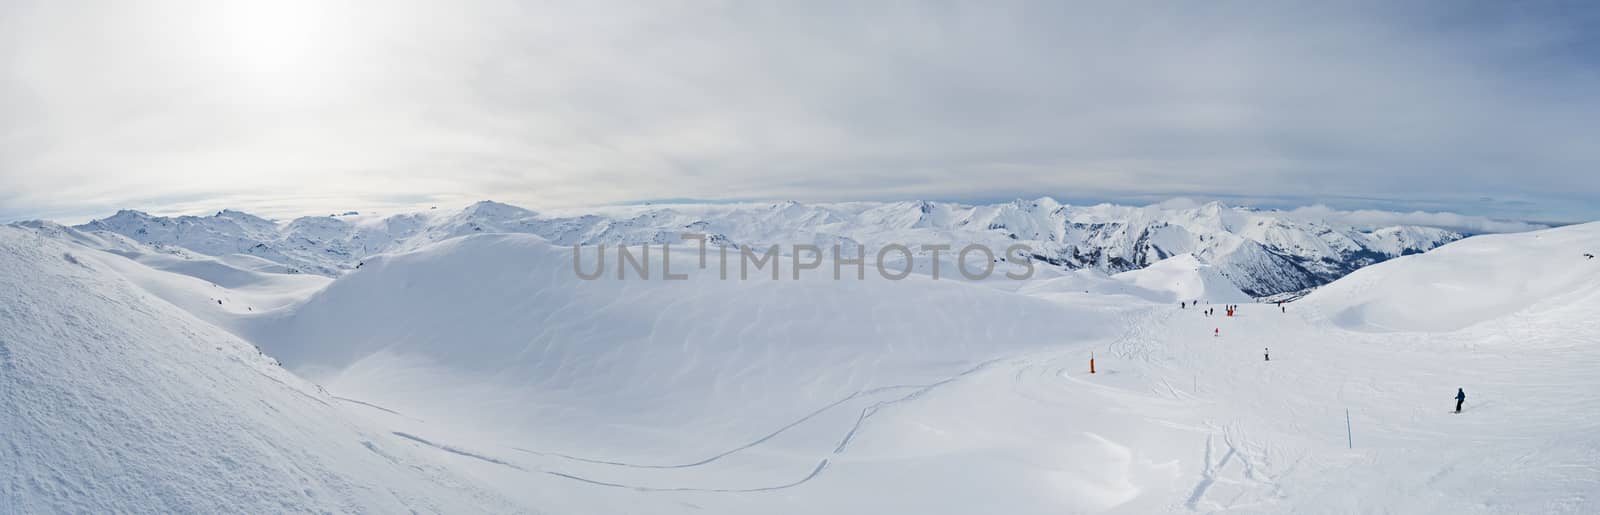 Panoramic view across snow covered alpine mountain range in alps with ski piste